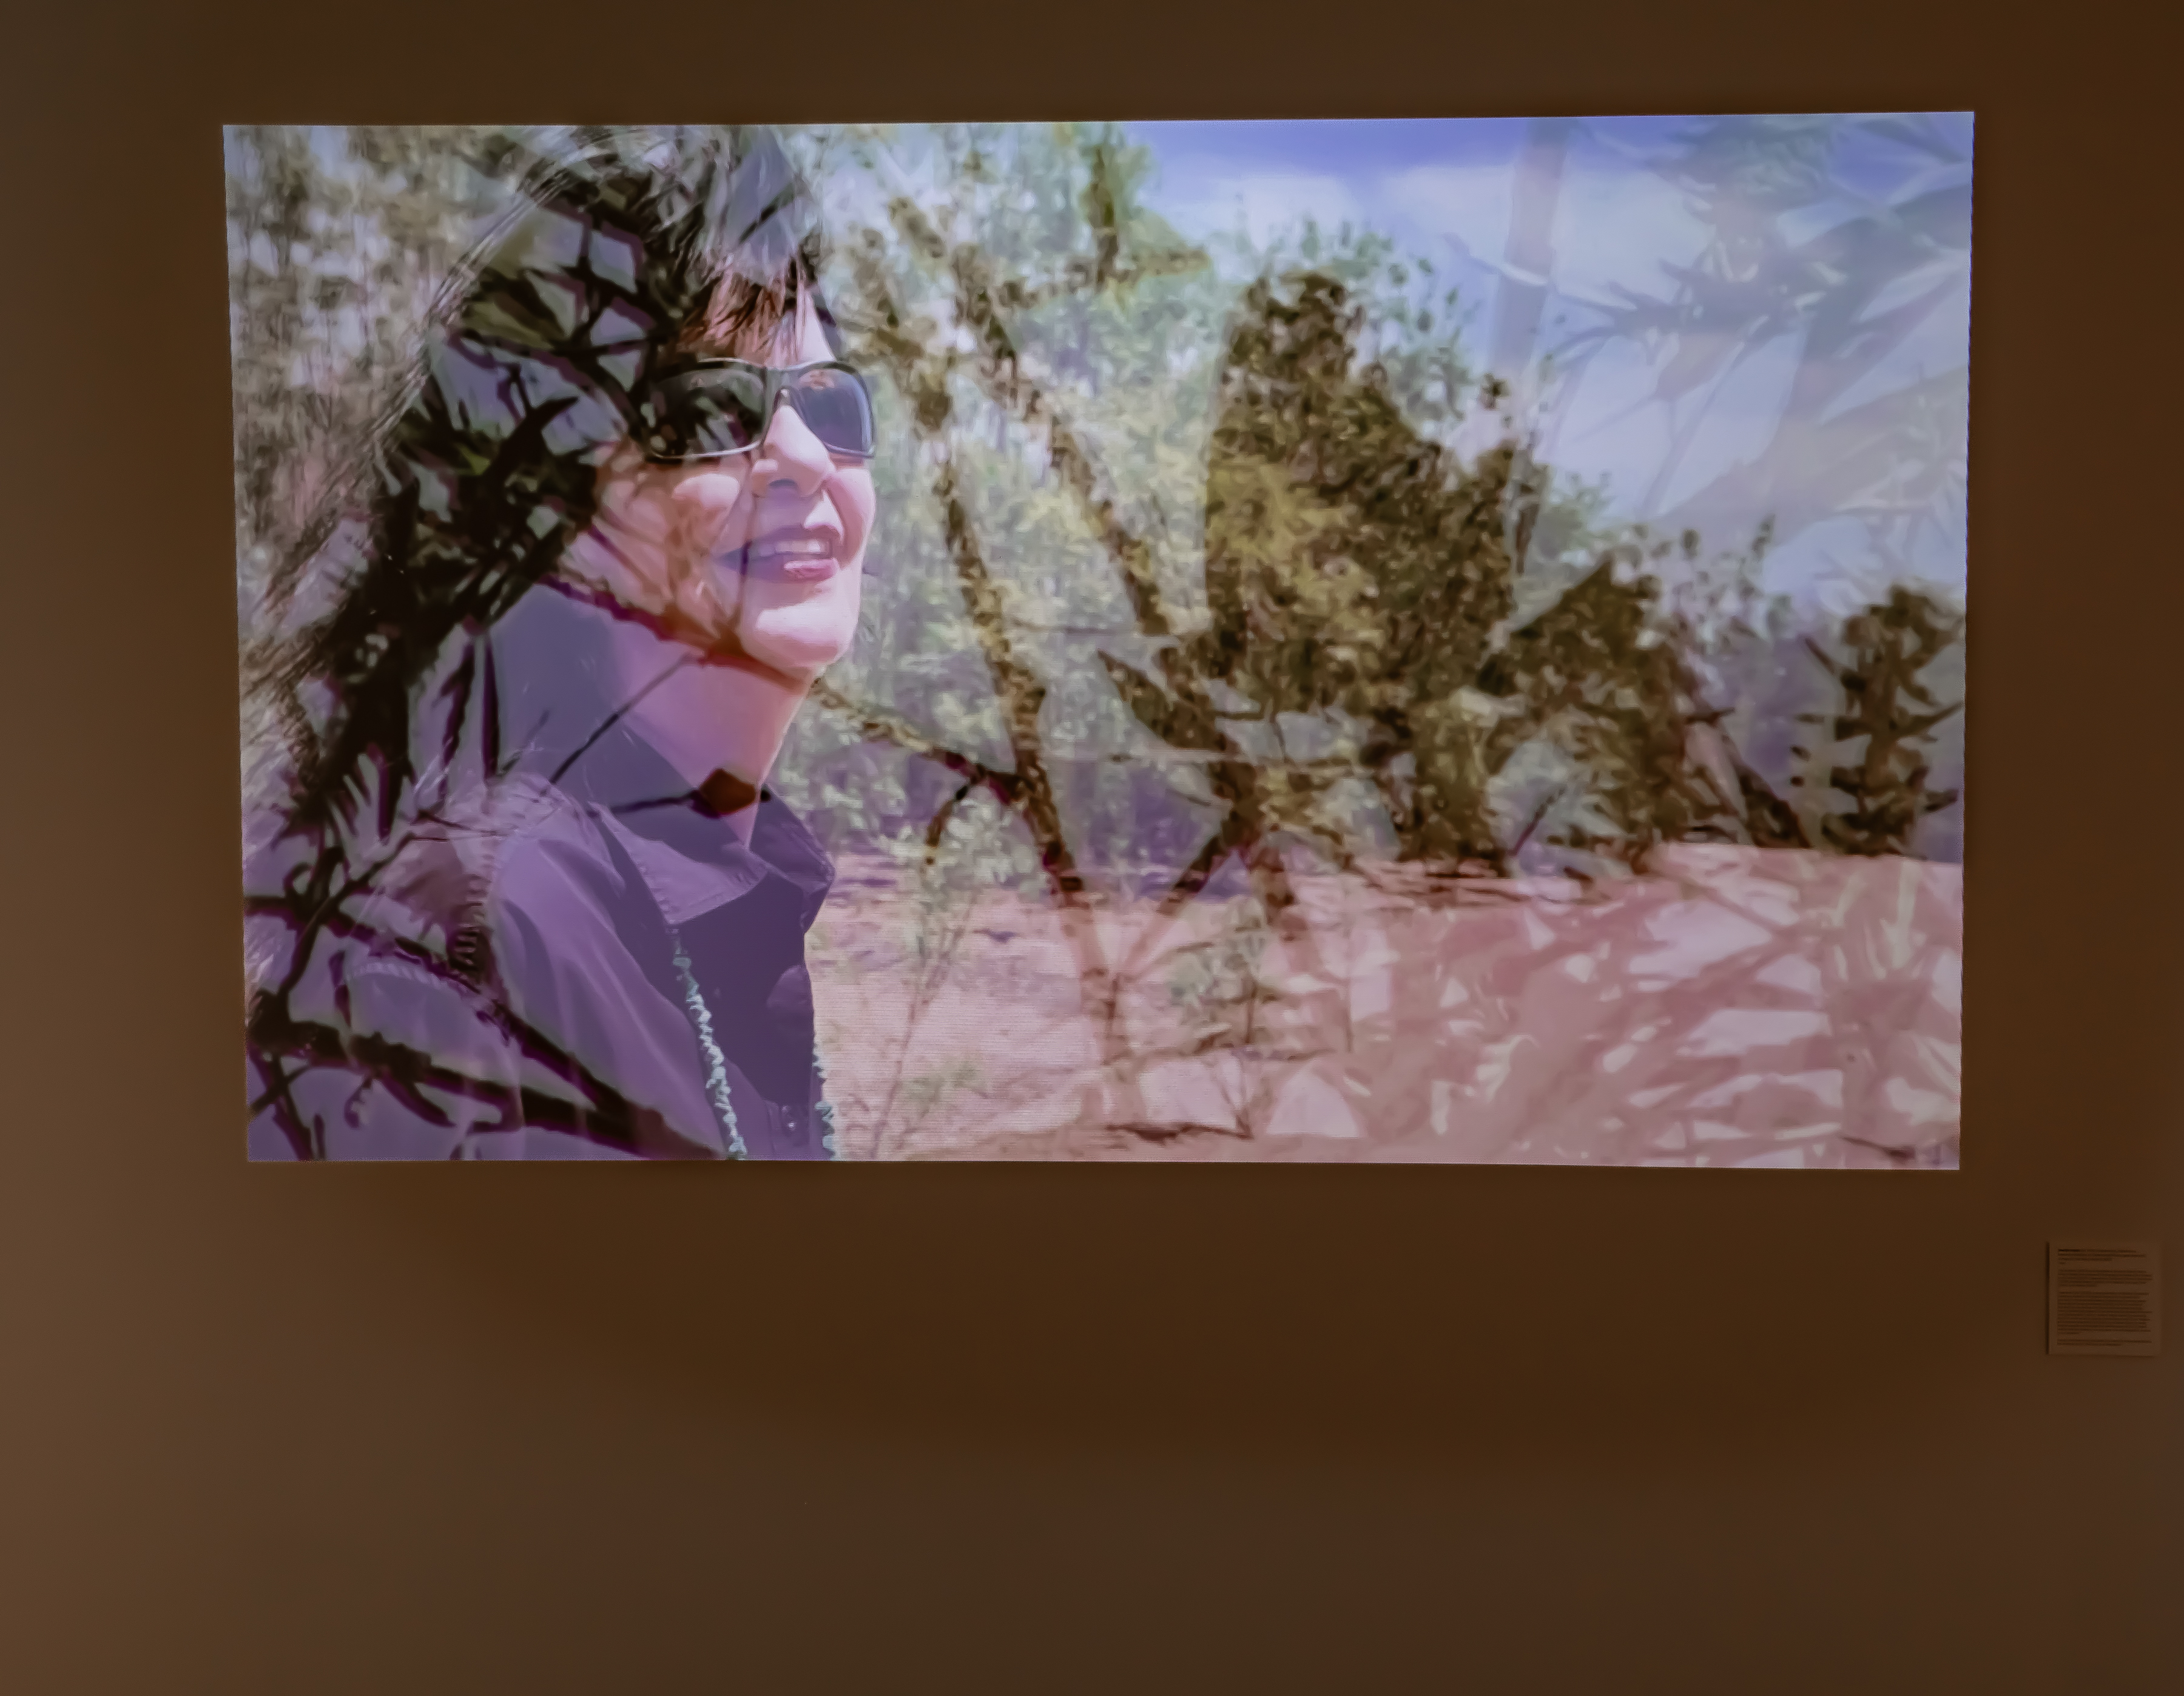 A projected image on a blank wall. In the image, a woman is outside, dressed in a dark shirt with dark sunglasses and dark hair. An overlay of branches and twigs is fading in on top of the woman.